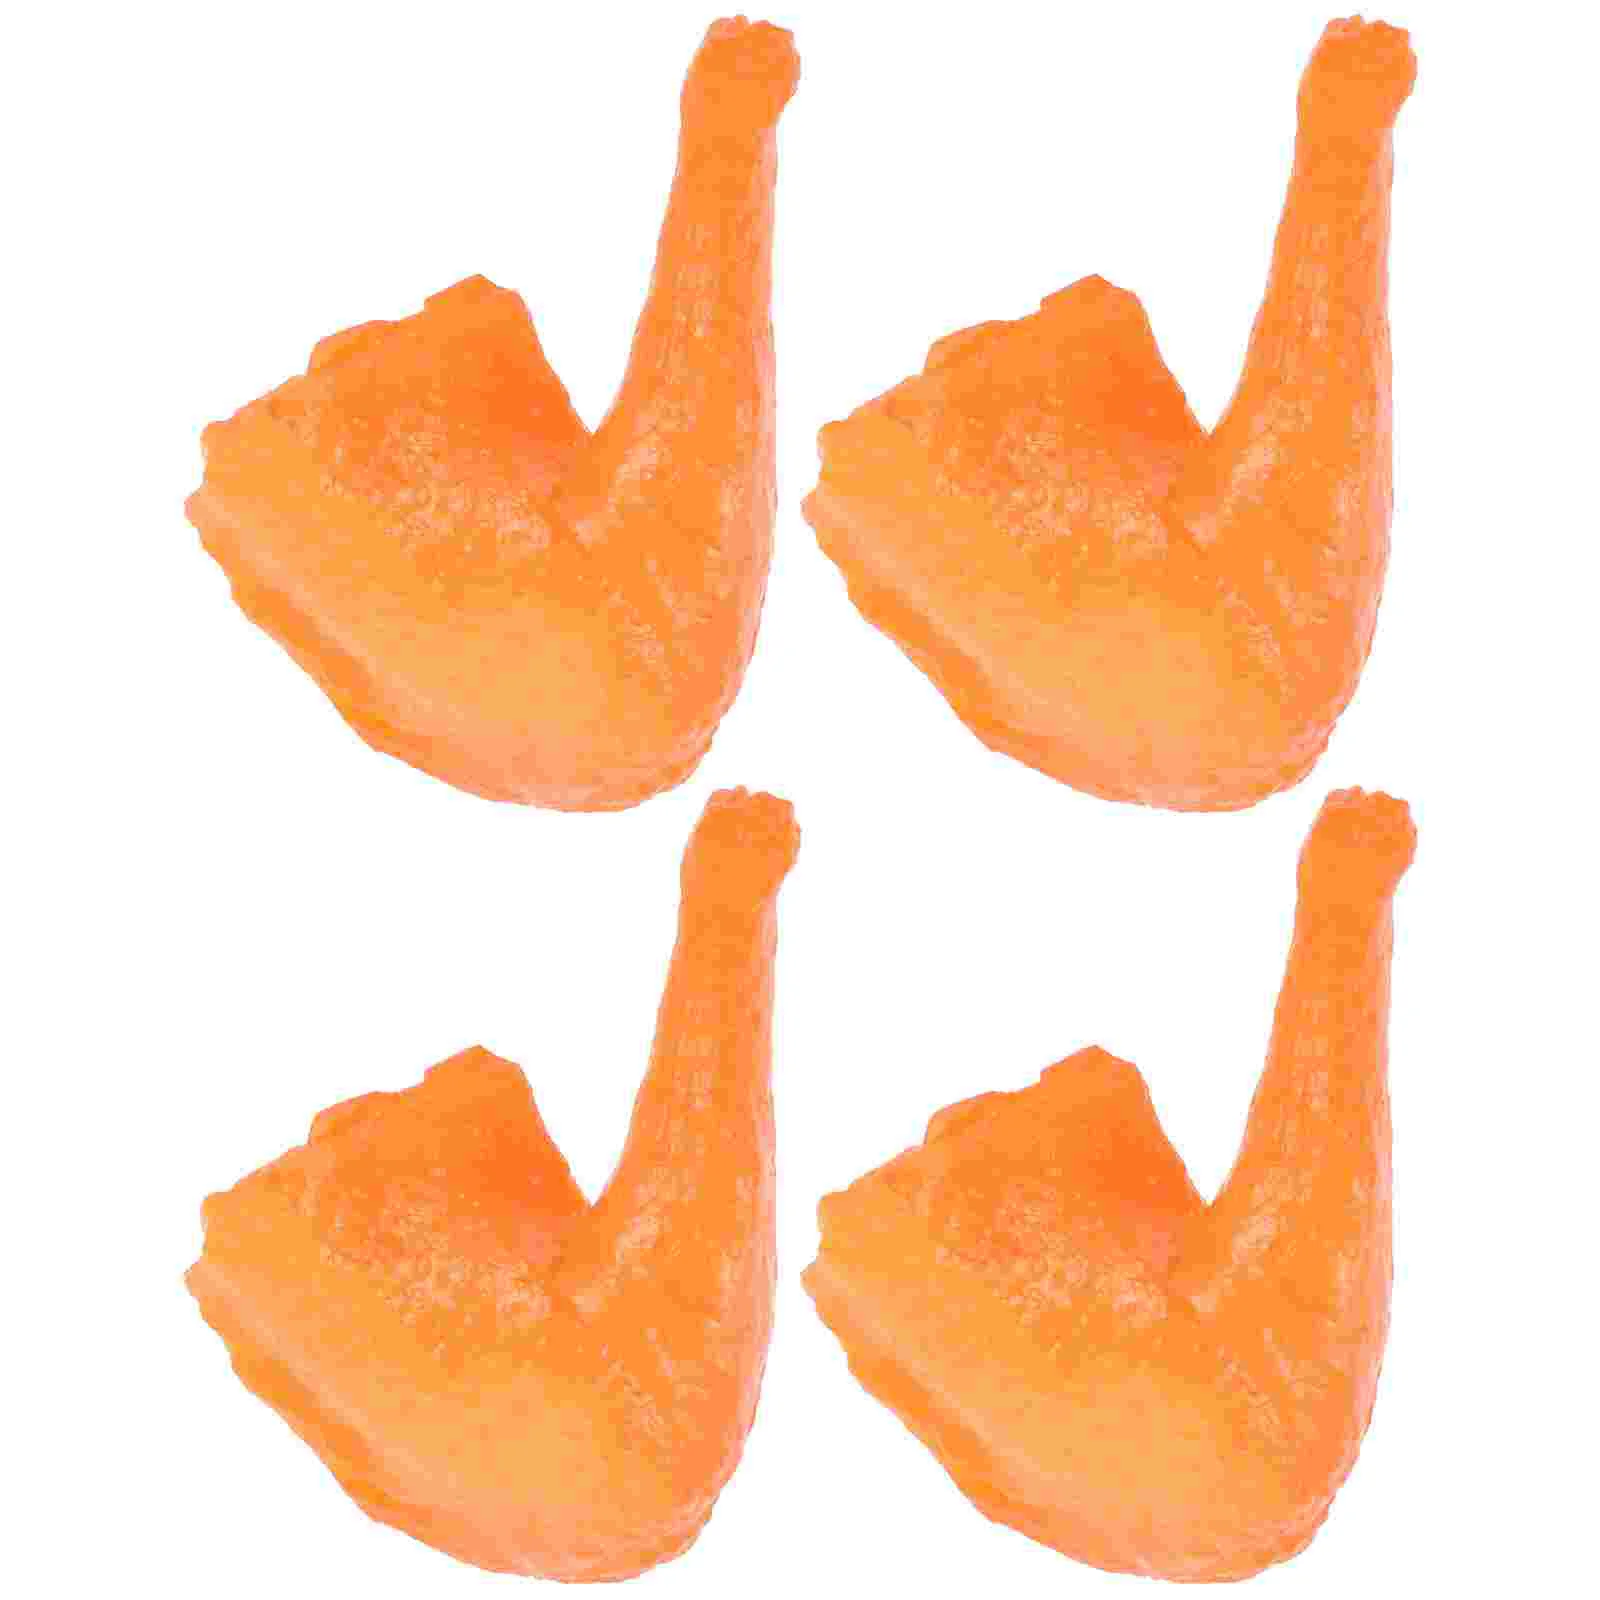 

4pcs Pretend Play Food Toy Simulation Fried Chicken Models Realistic Artificial Fried Chicken Leg